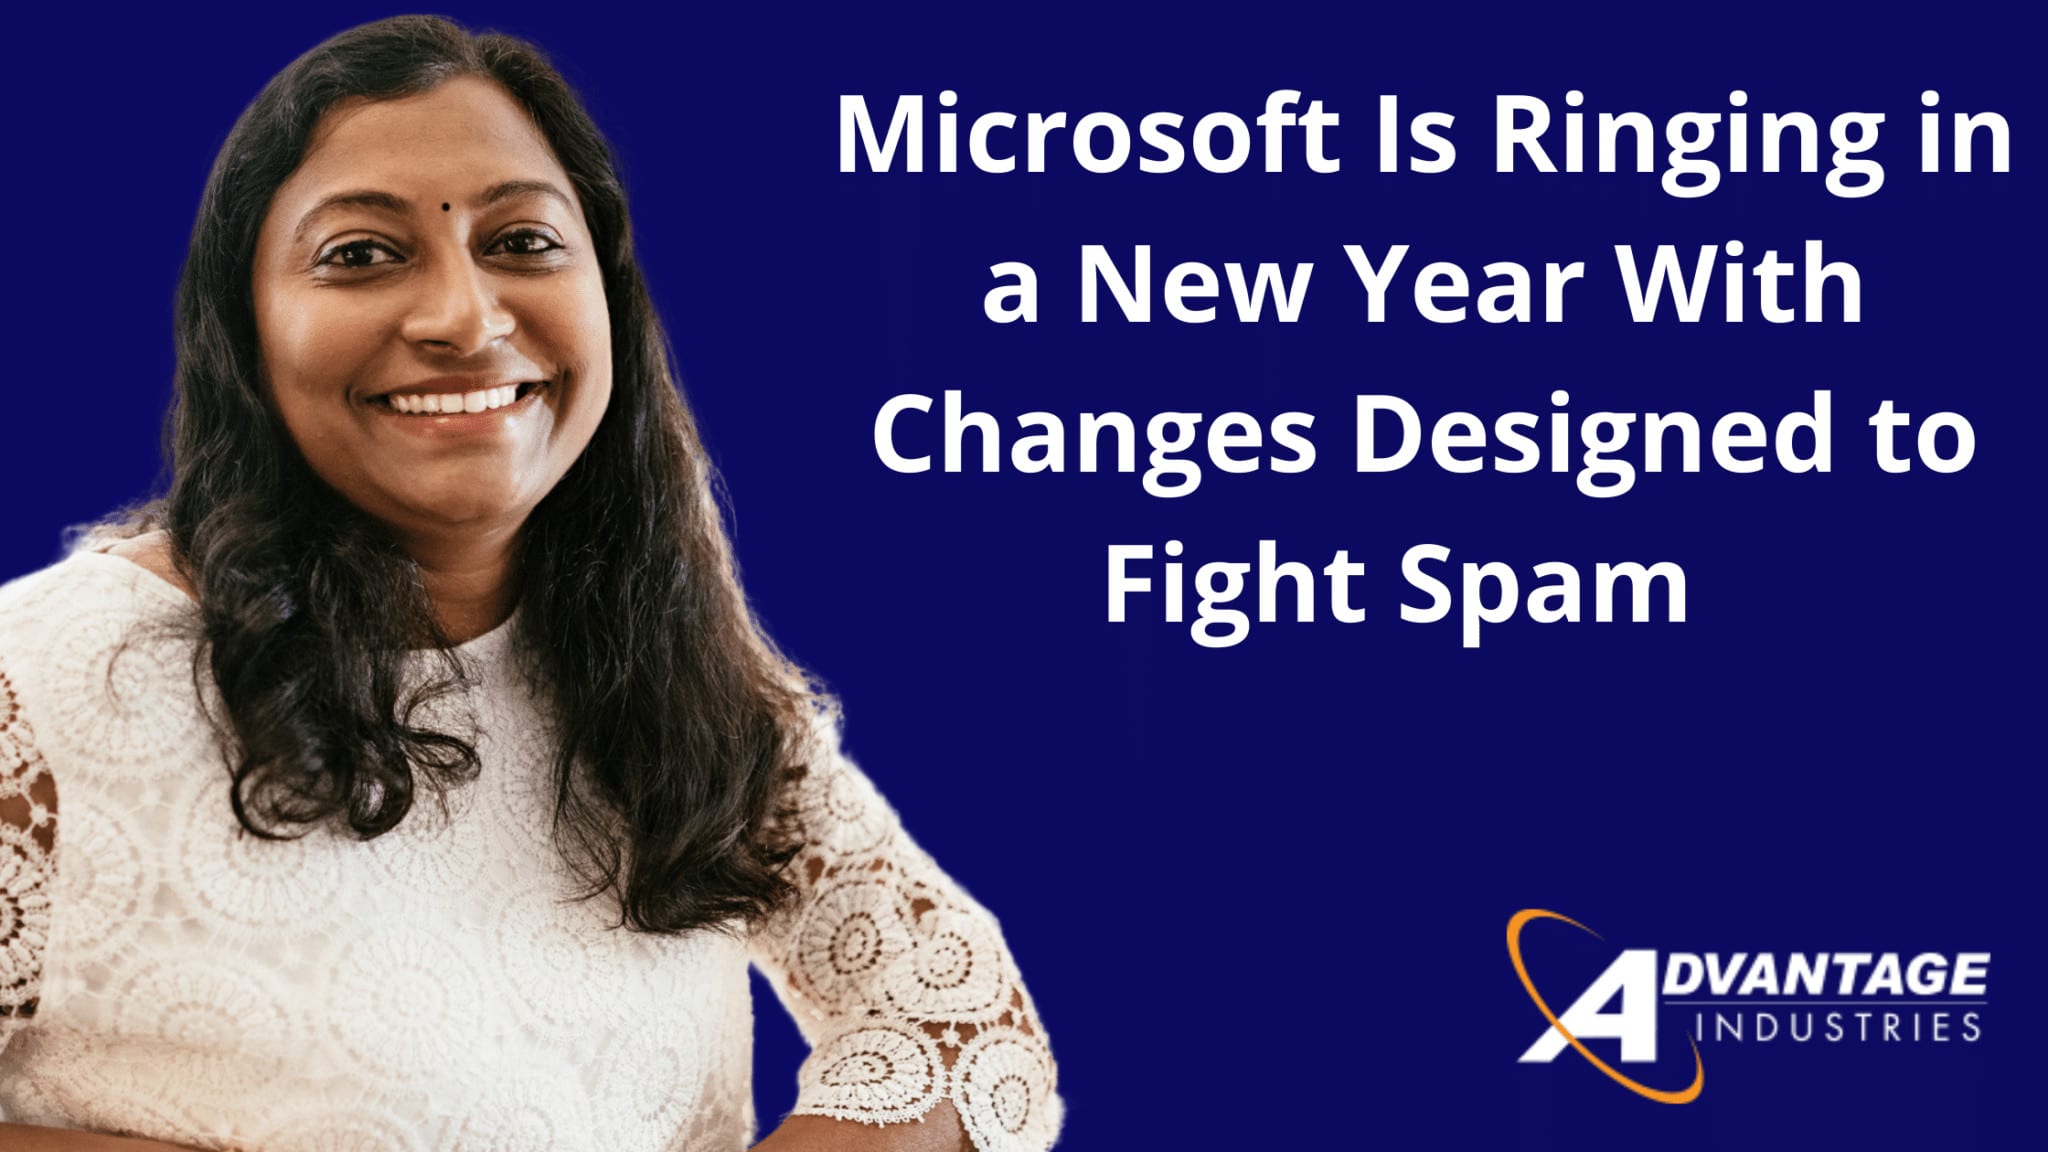 Microsoft Is Ringing in a New Year With Changes Designed to Fight Spam